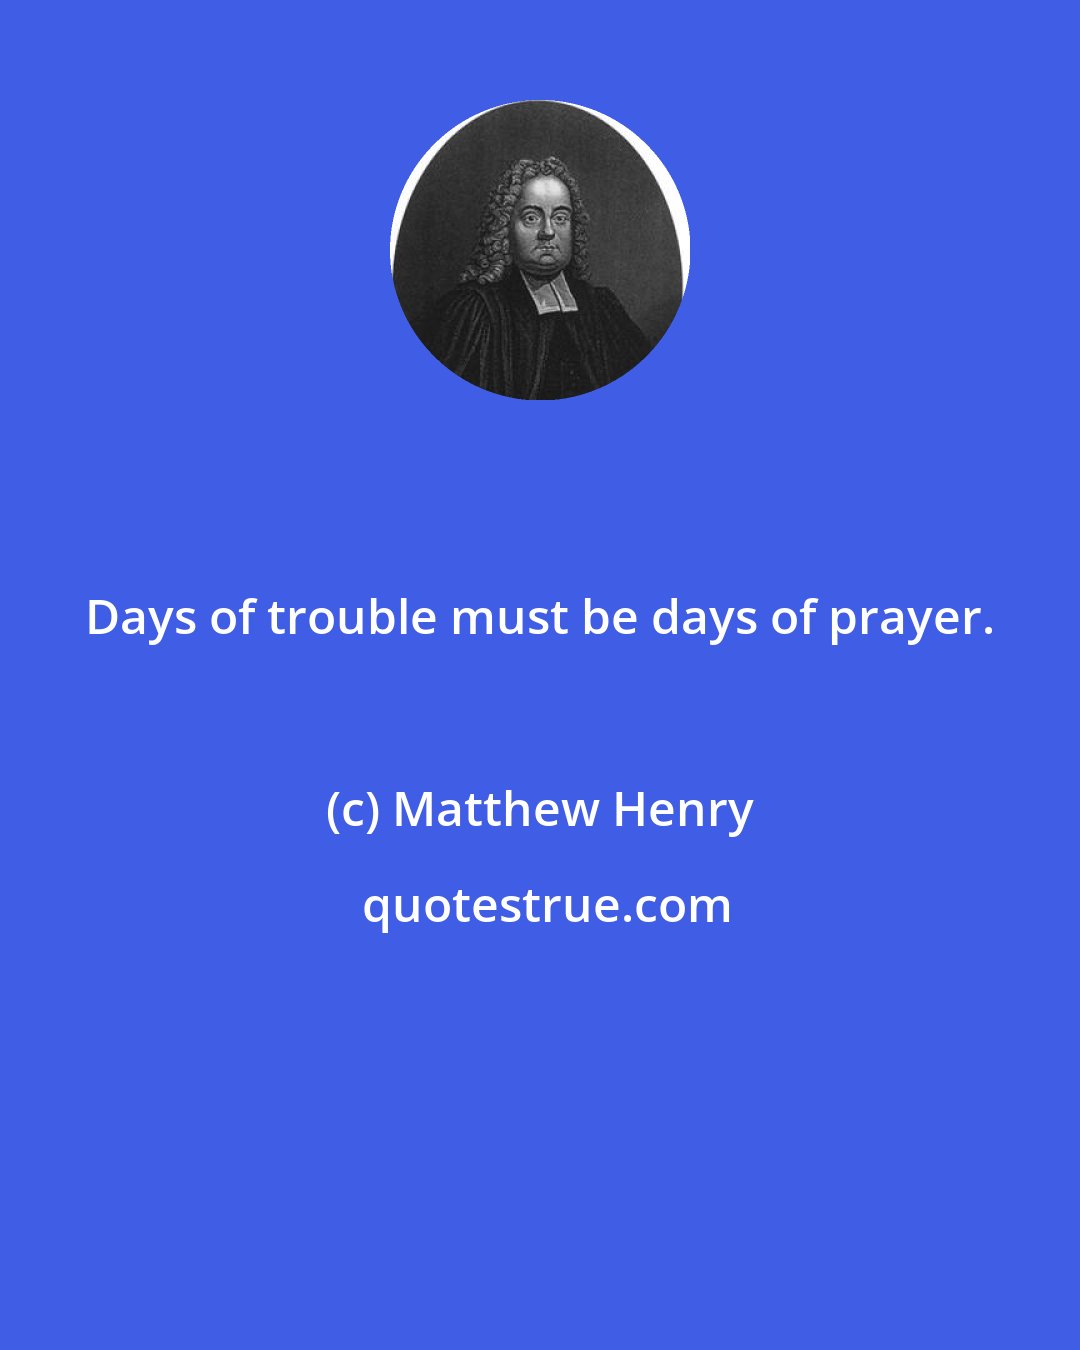 Matthew Henry: Days of trouble must be days of prayer.